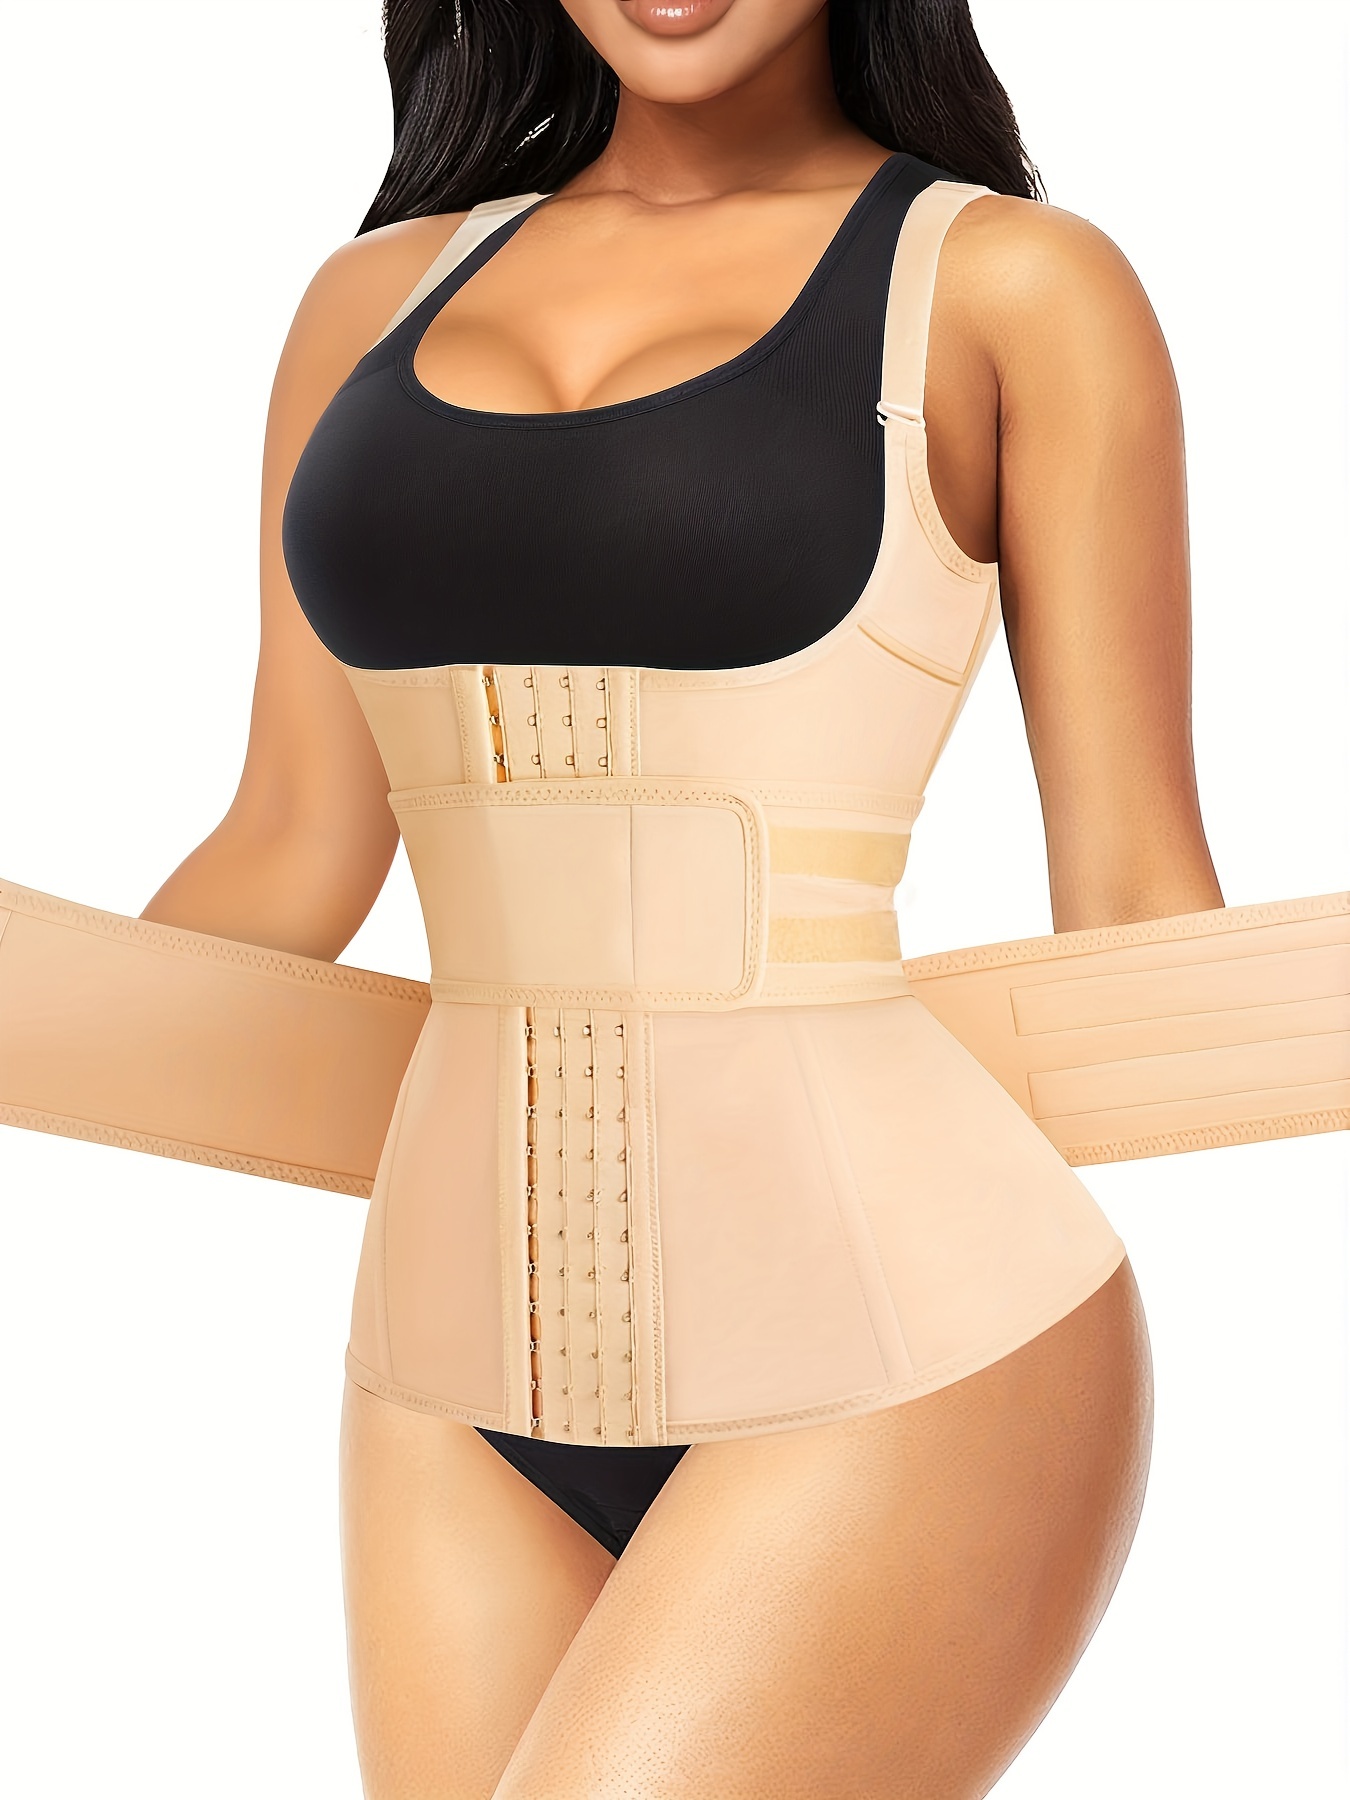 Women Waist Trainer Corset Body Shaper Body Sculpting Exercise Belts  Slimming Exercise Belts Exercise Workout Gym Corset